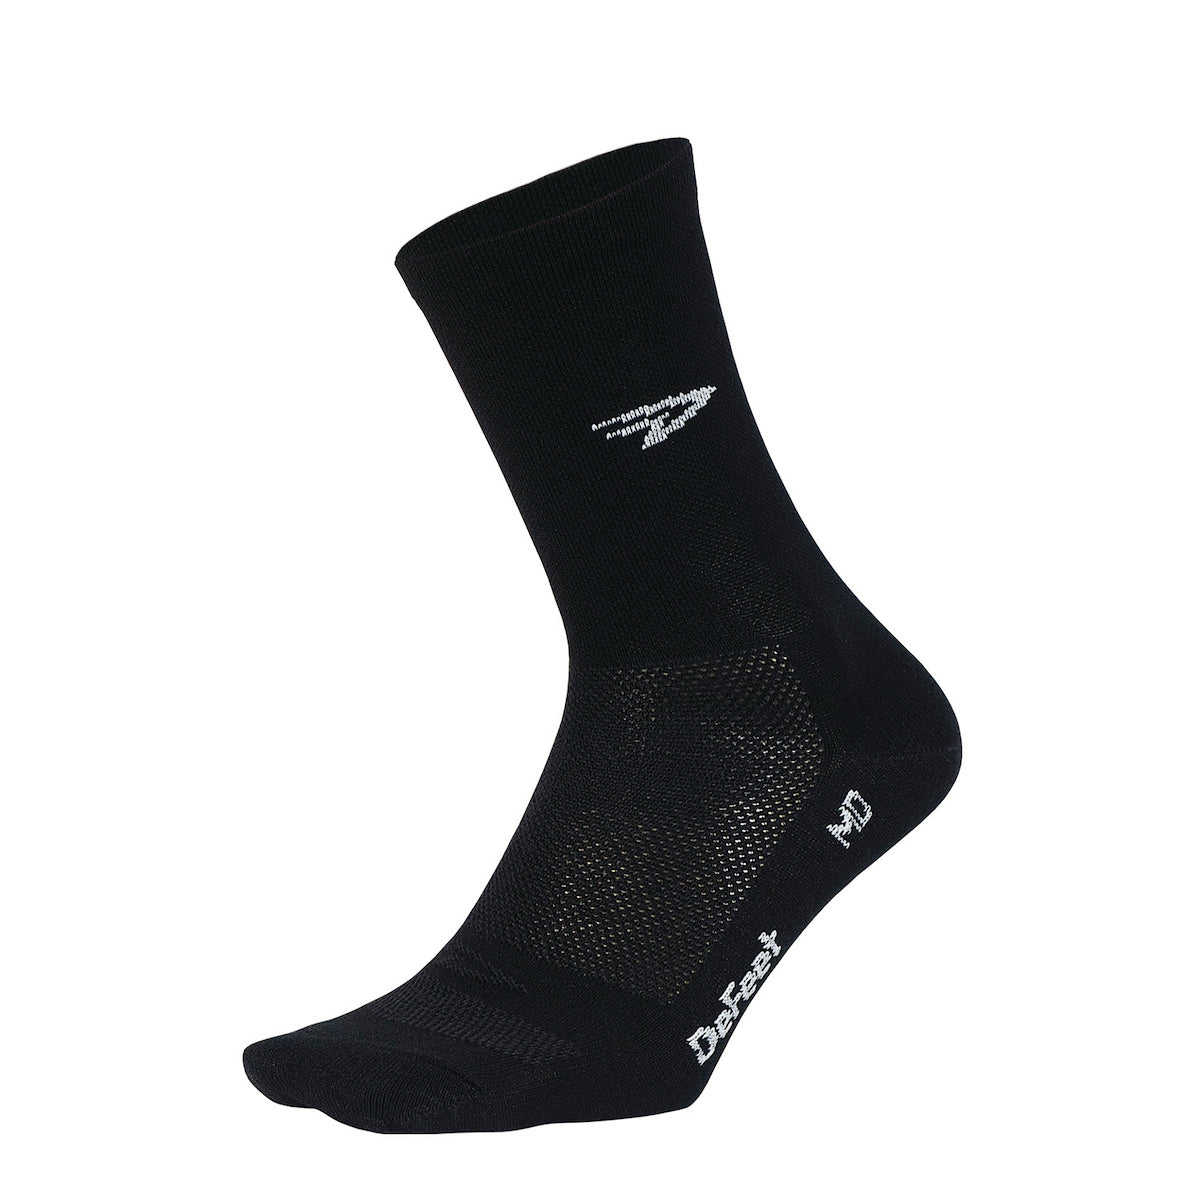 Black DeFeet Aireator cycling sock with a 5" cuff and a white D-logo on the side of the cuff